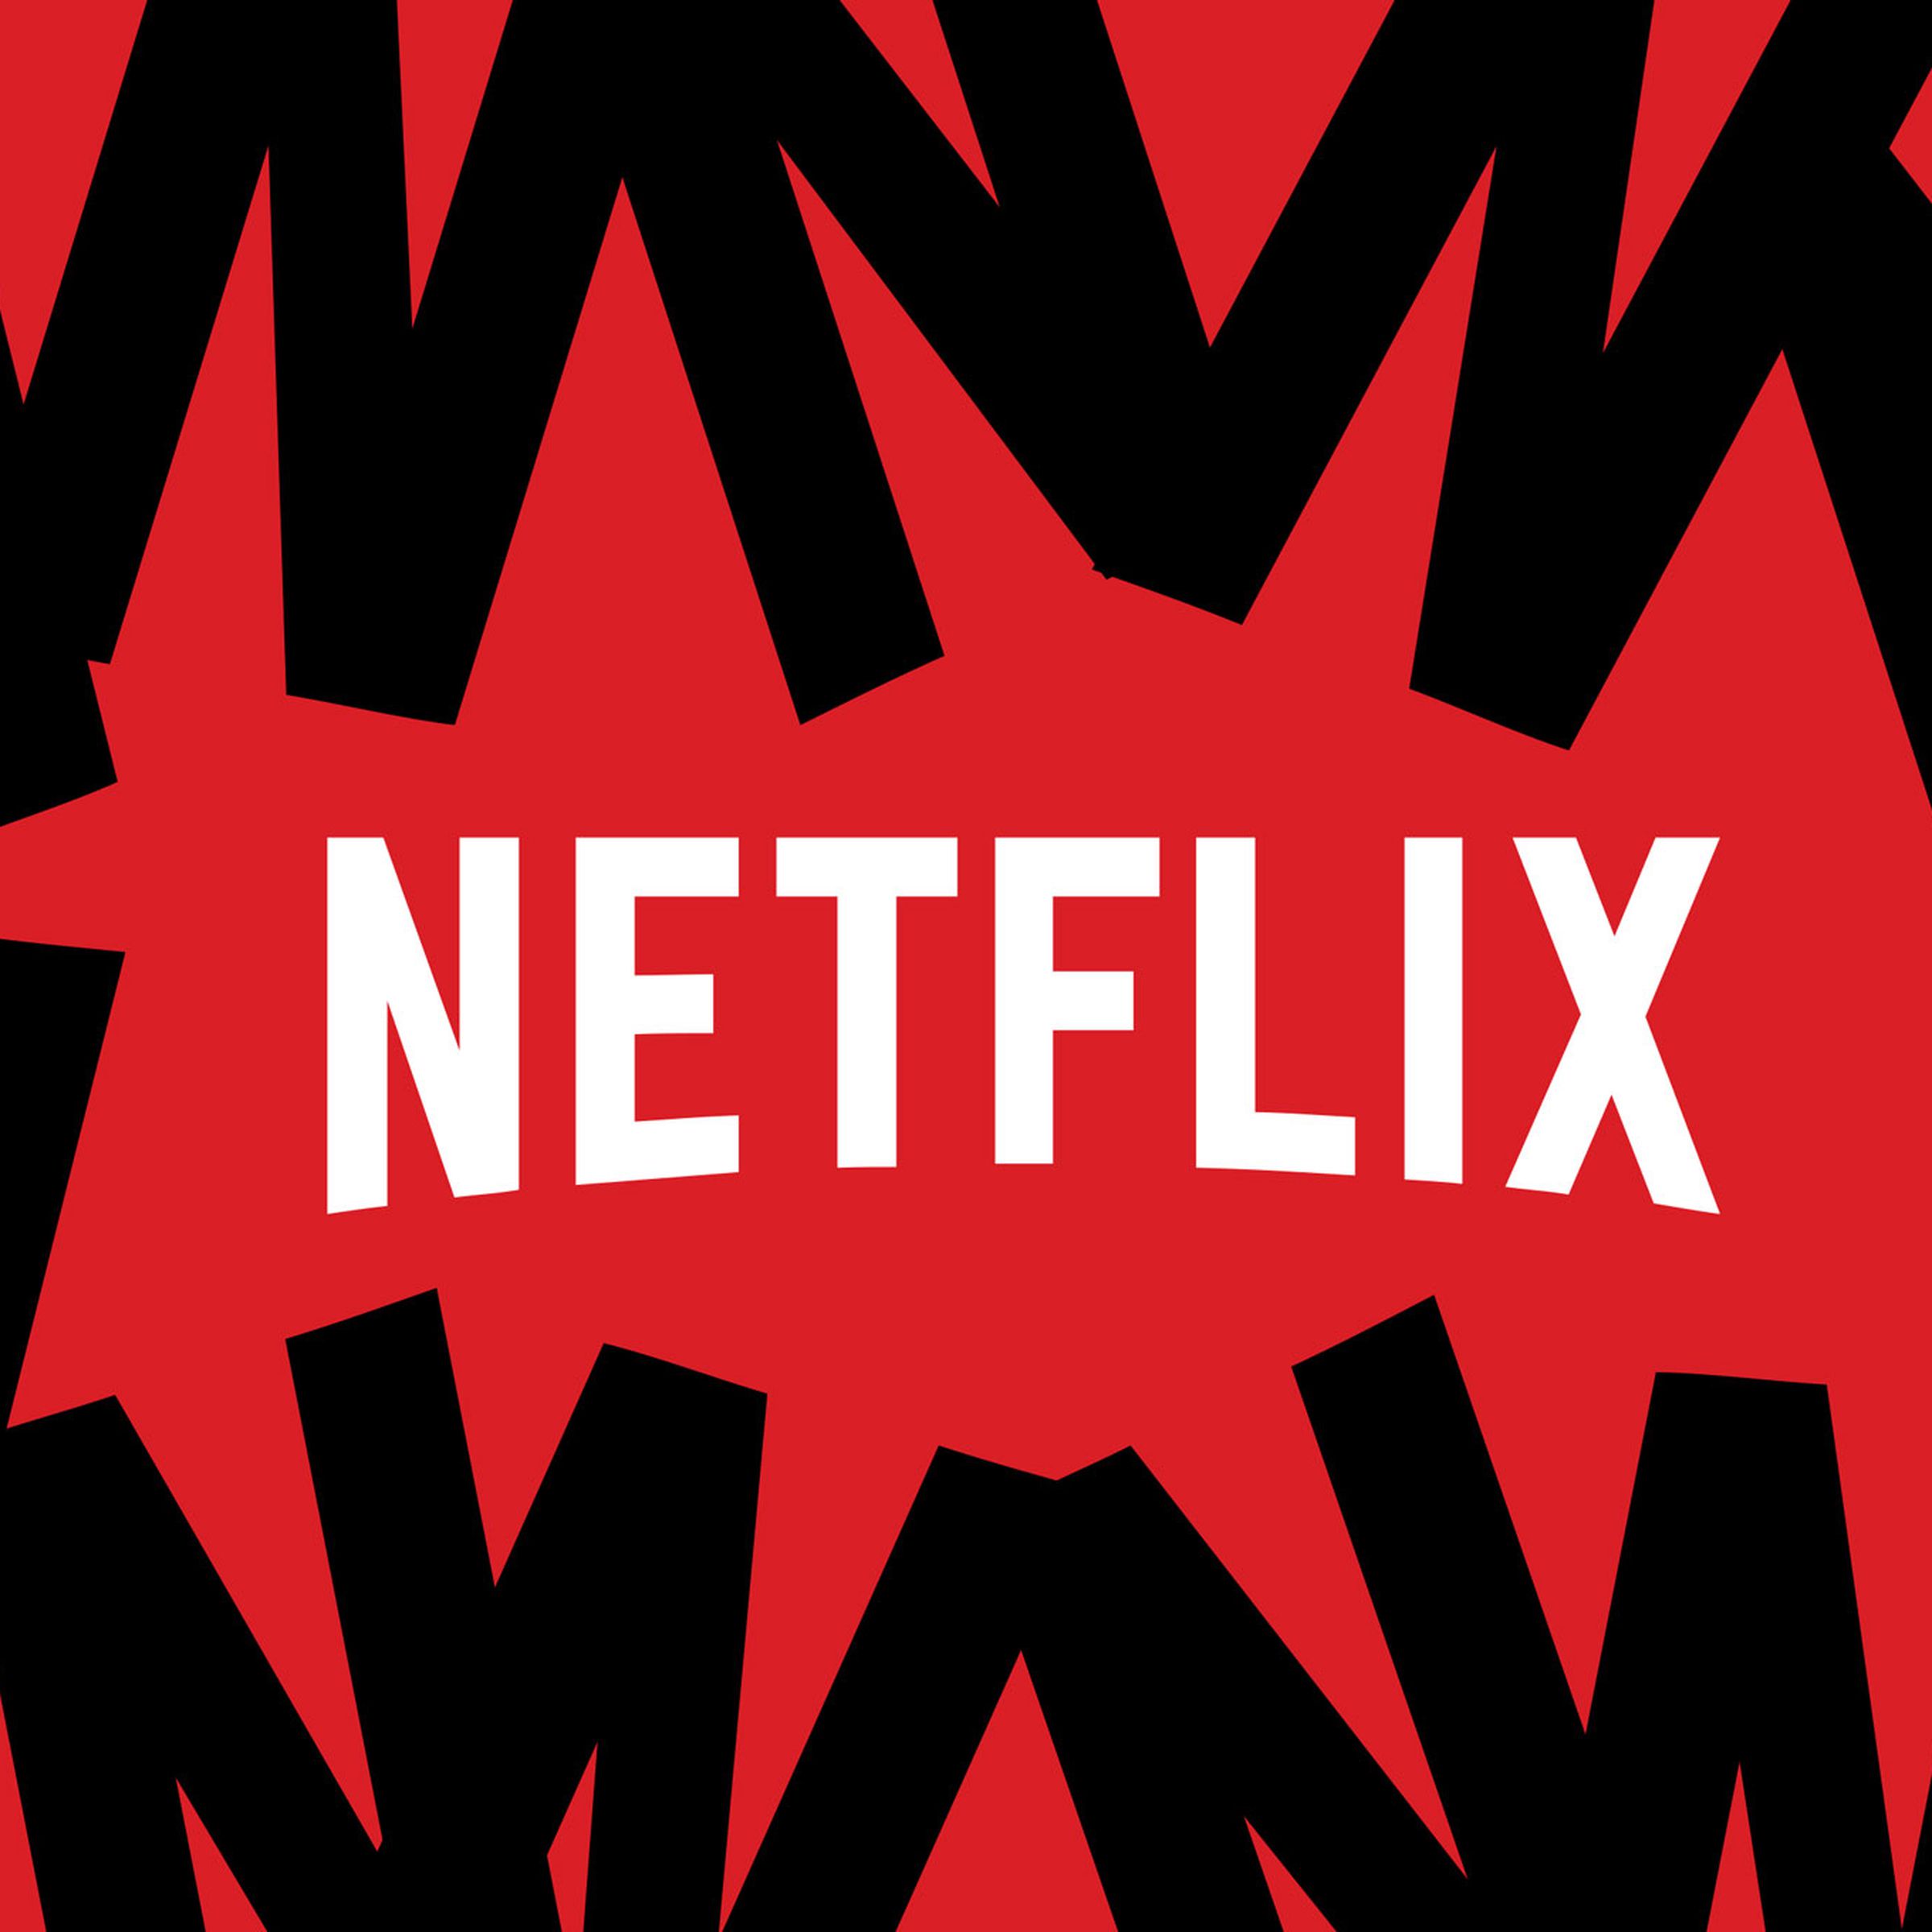 Illustration of the Netflix wordmark on a red and black background.